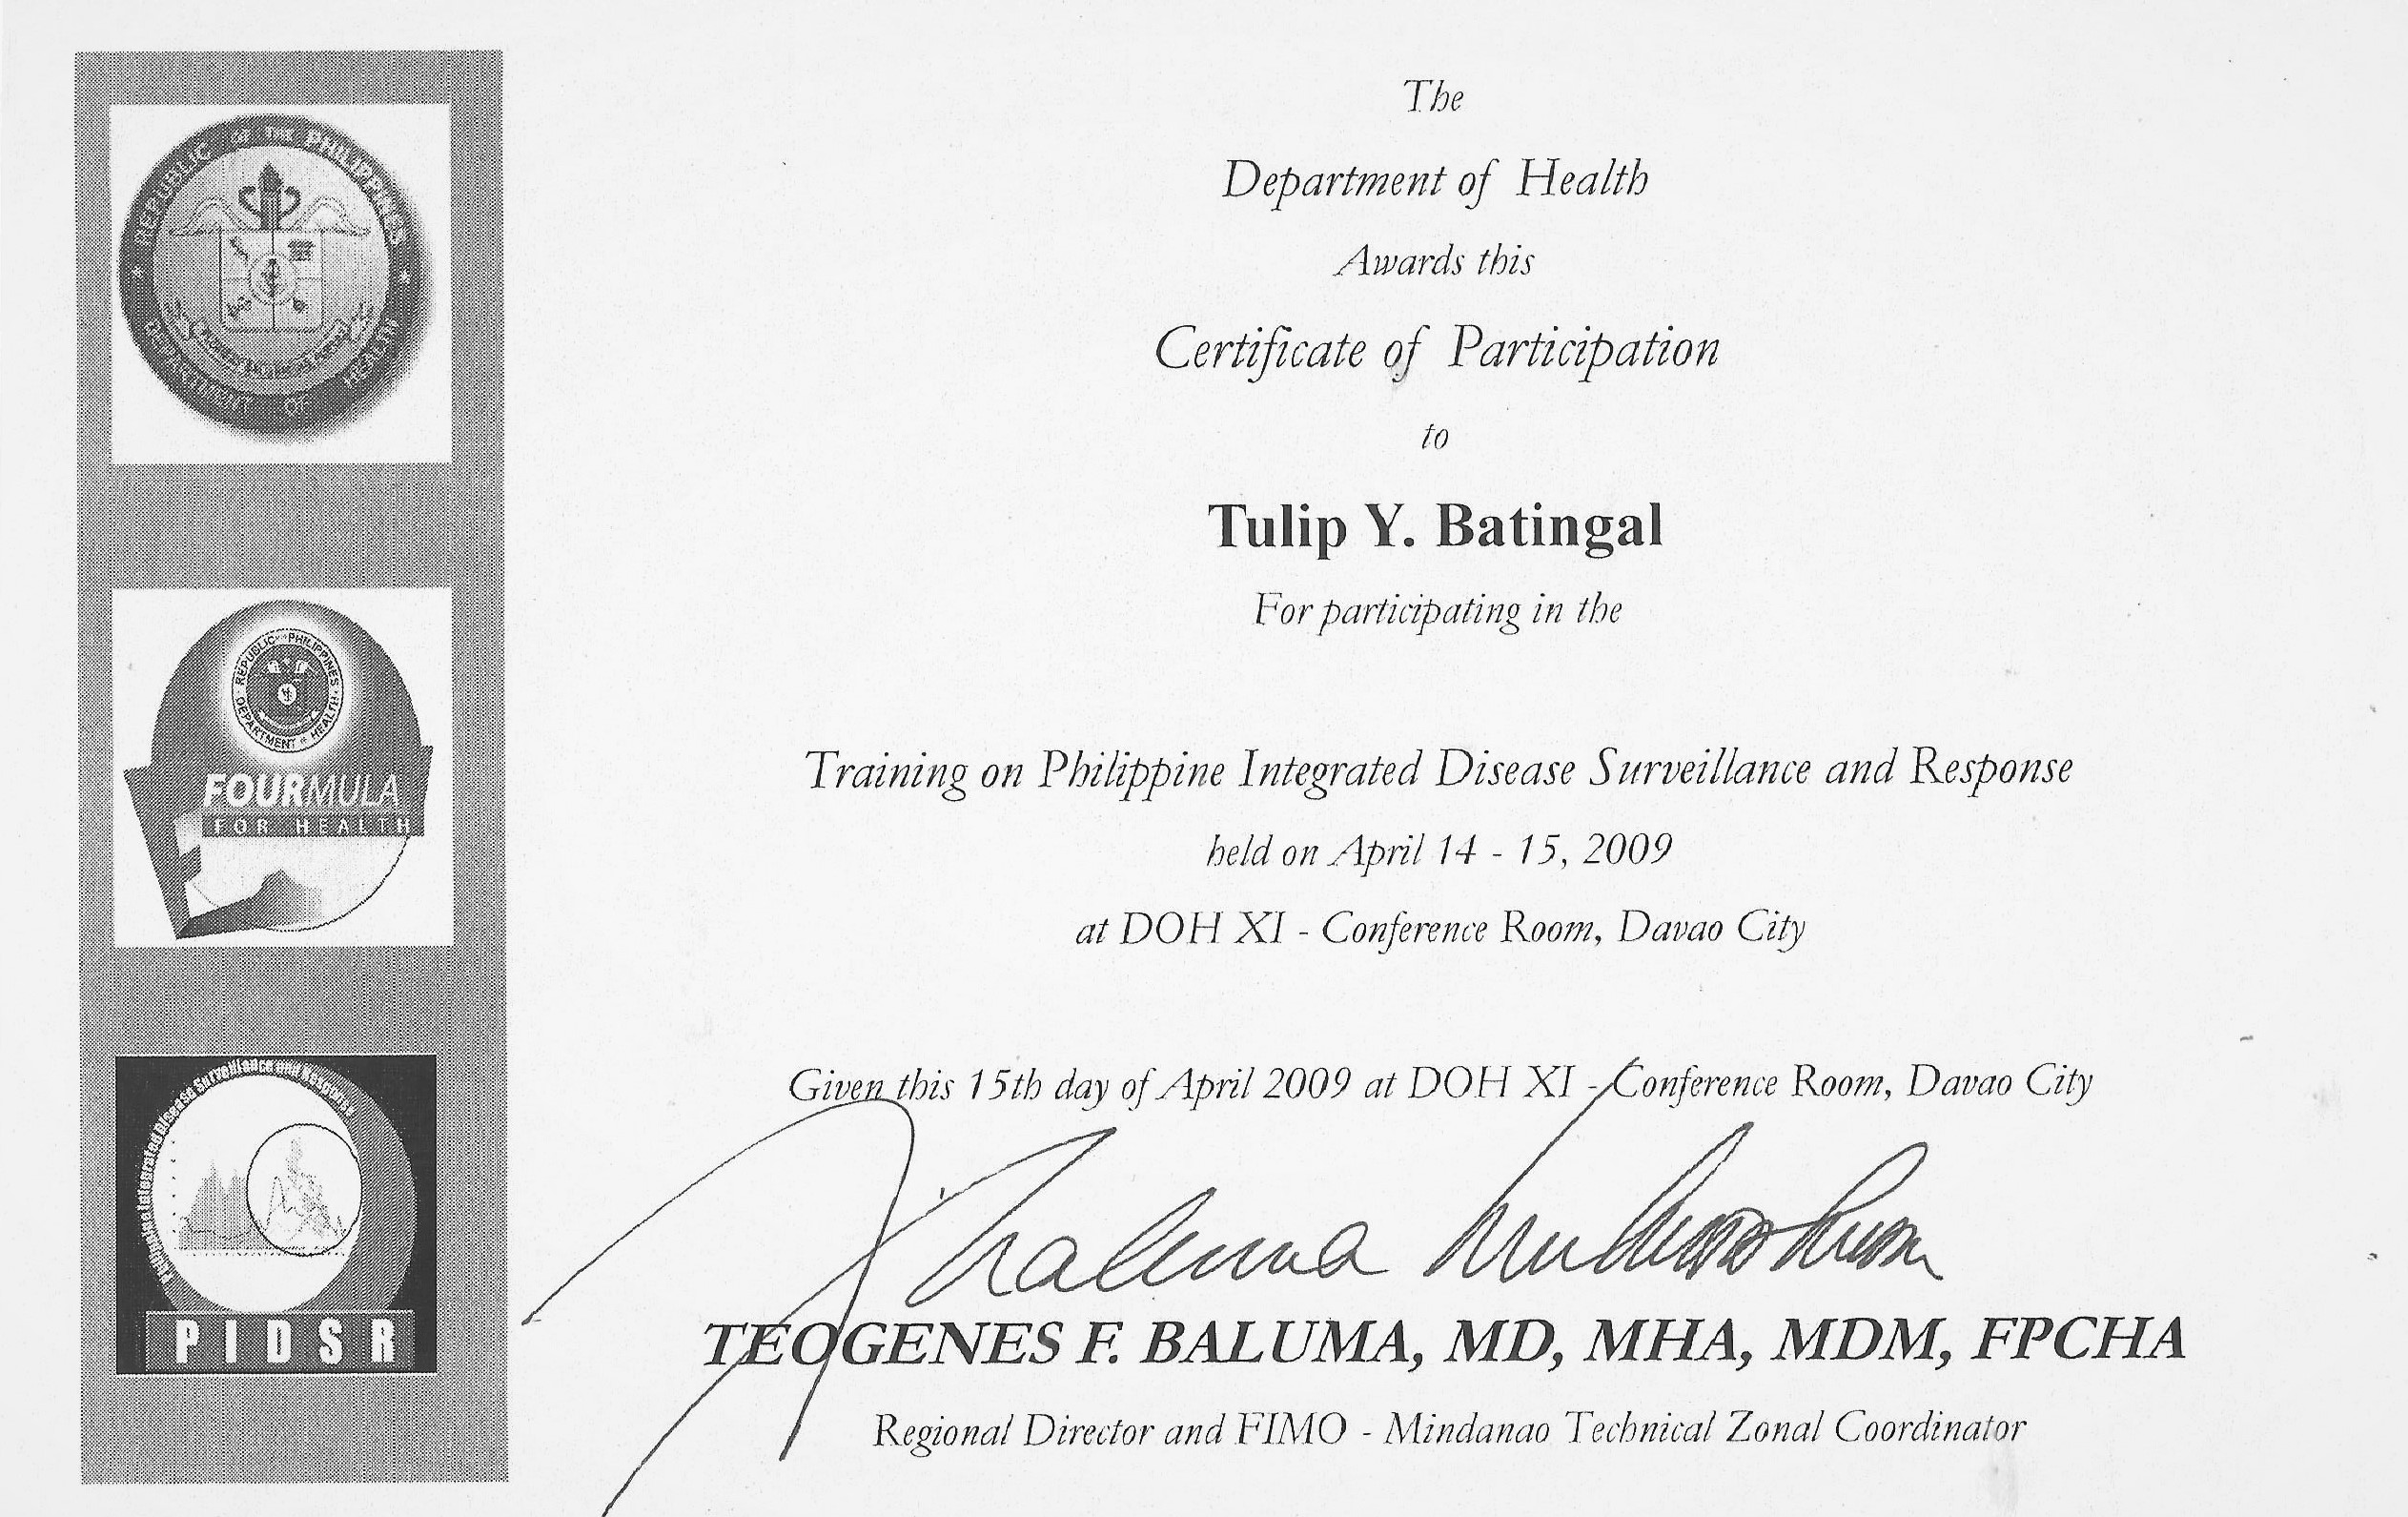 Certificate of Training on Philippine Integrated Disease Surveillance and Response